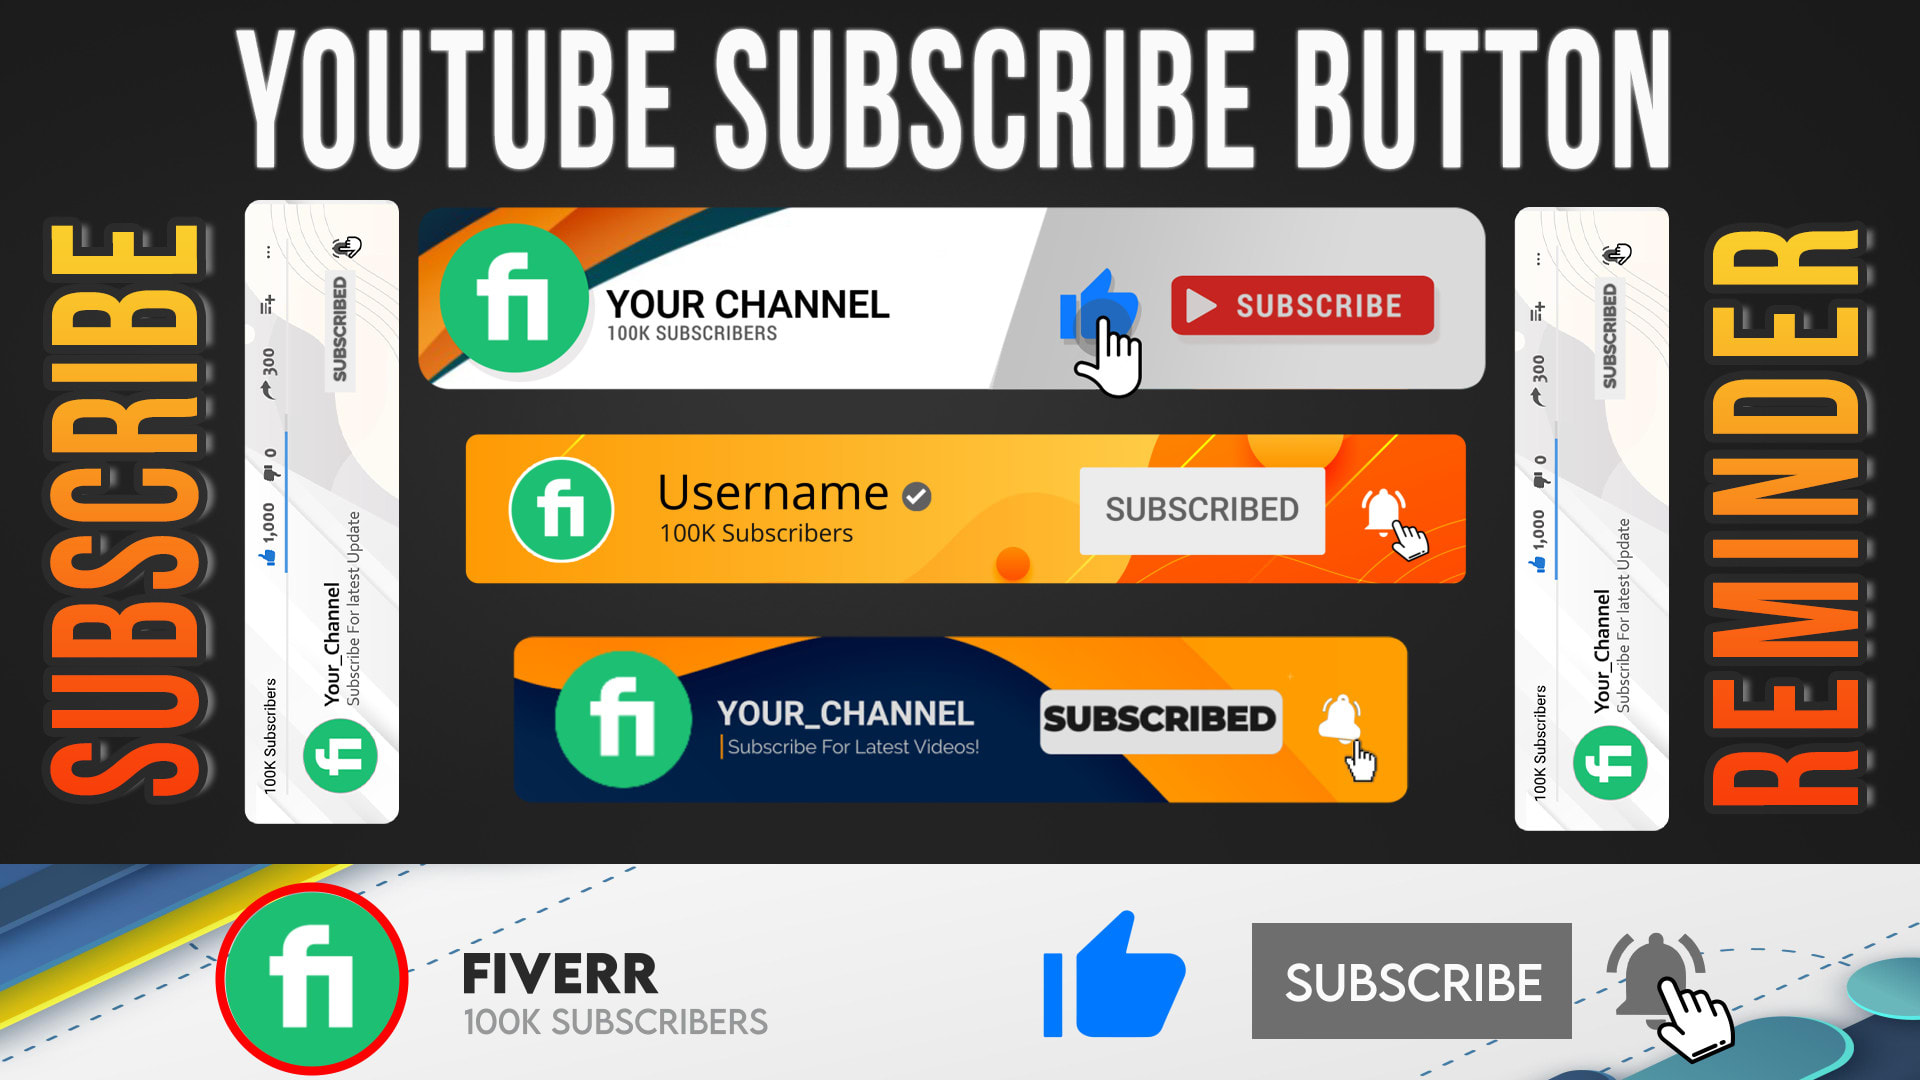 Make youtube subscribe button animation reminder by Nadeemkhadim | Fiverr